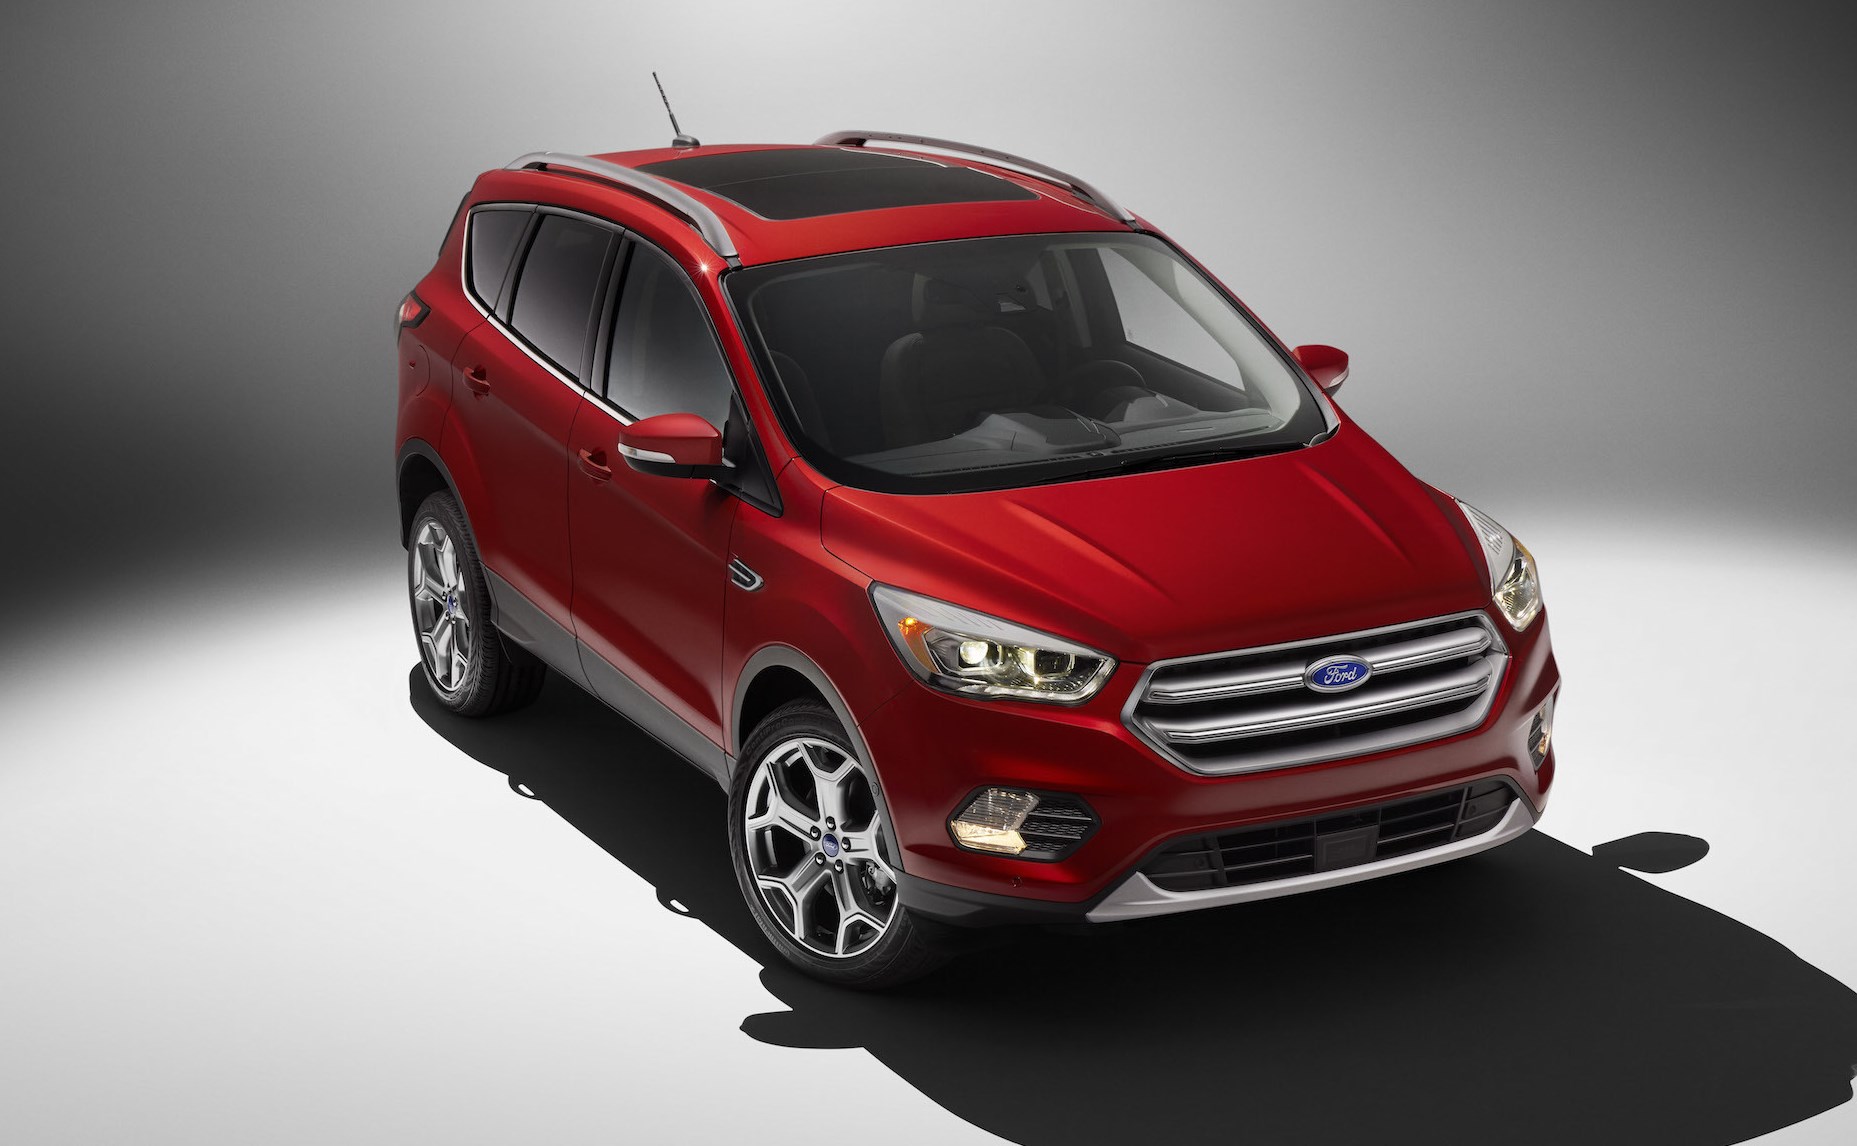 Used Ford Escape For Sale - Special Offers | Edmunds